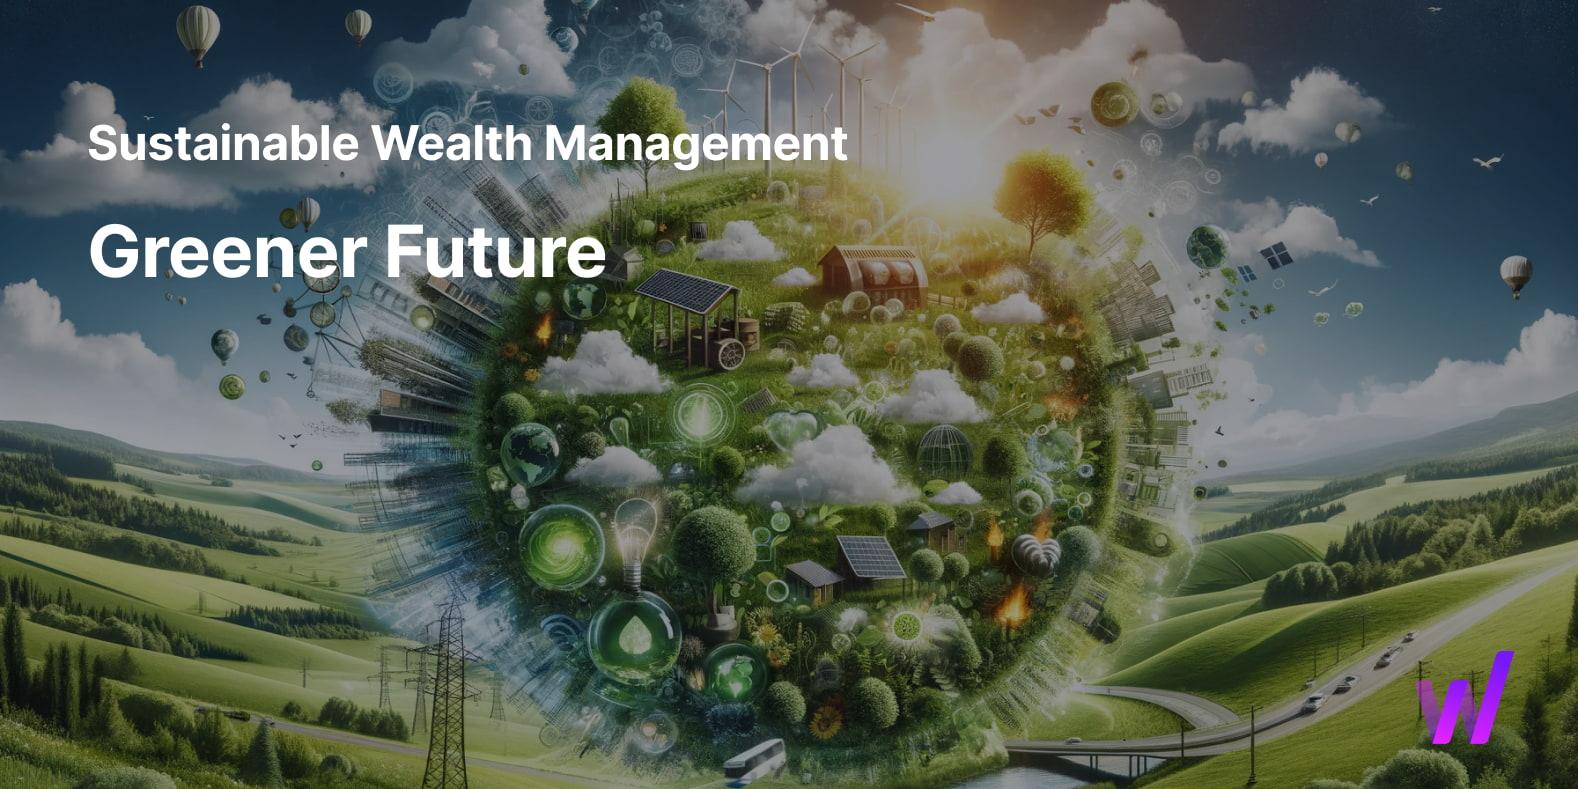 Green greener future sustainable wealth management title in the picture with a city landscape 